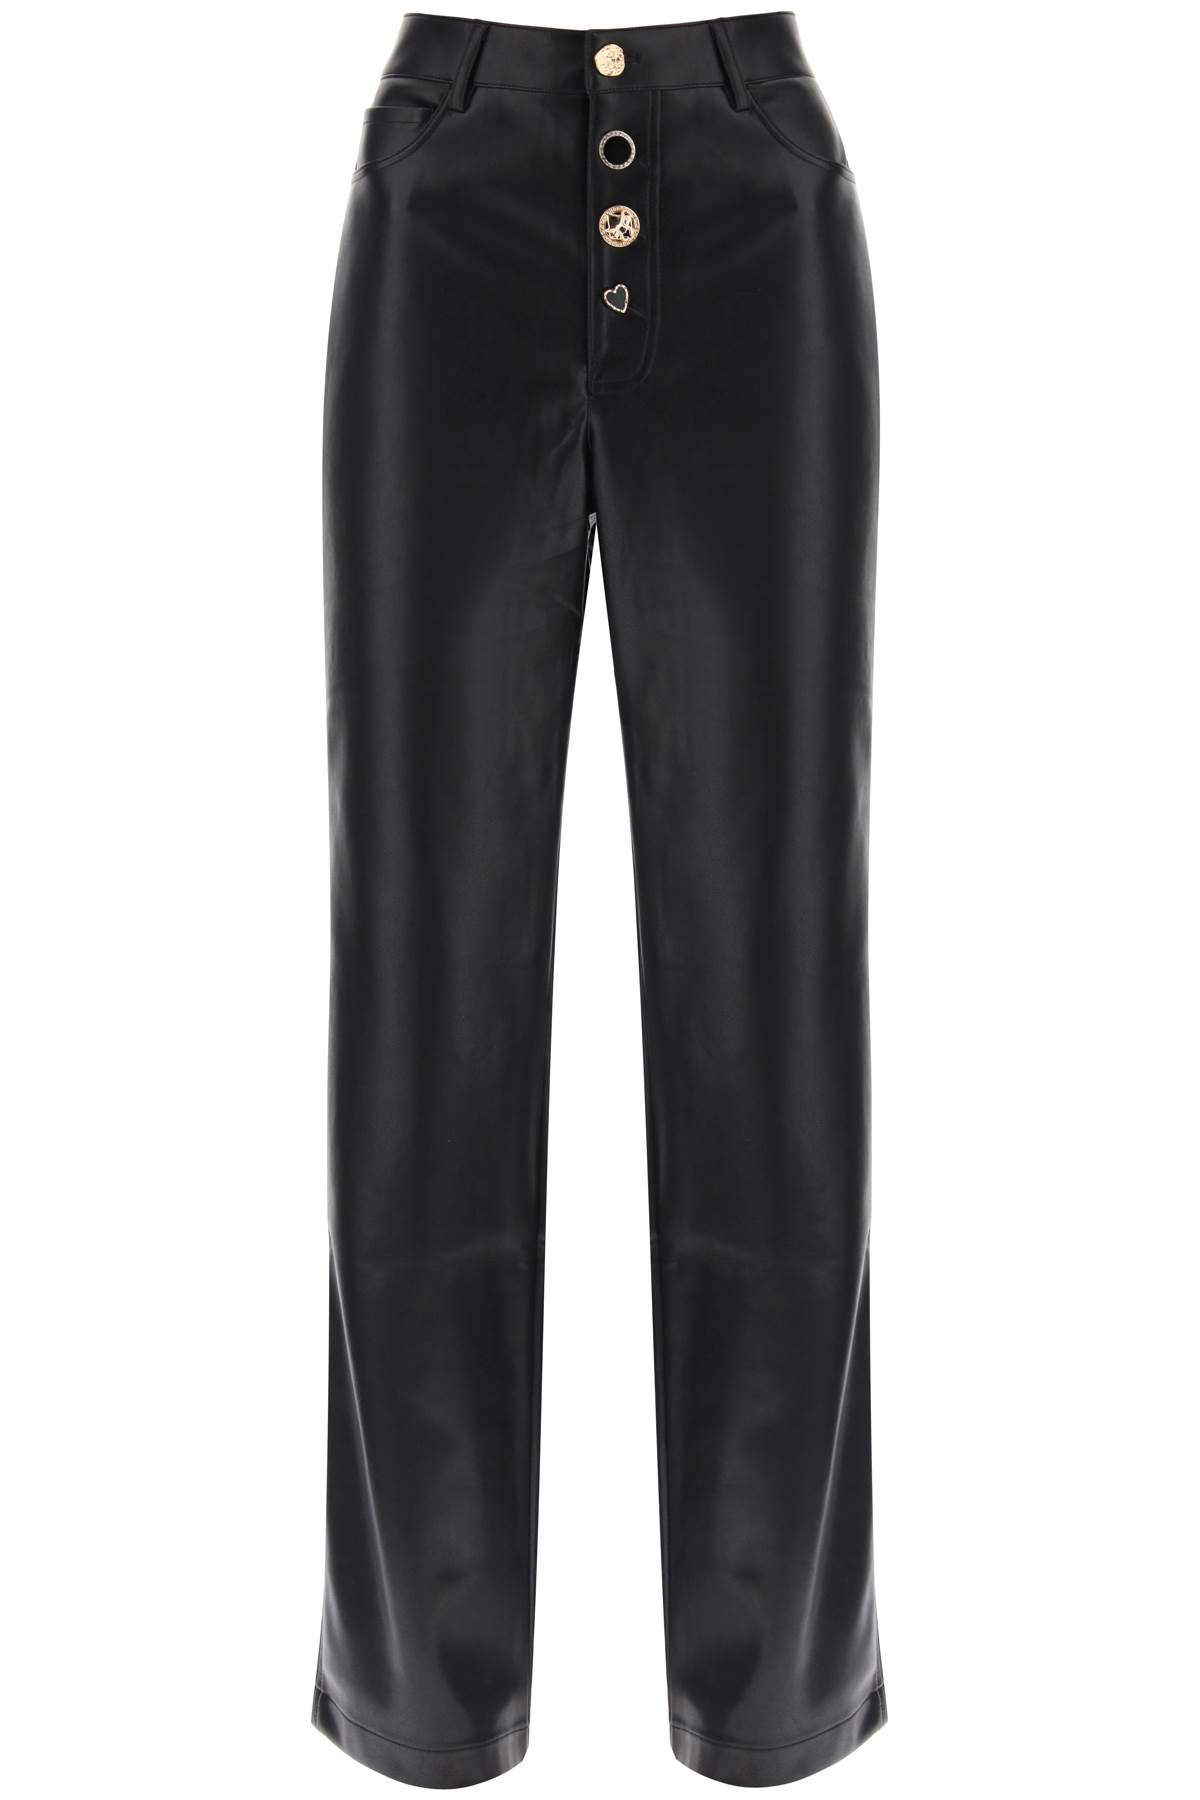 Embellished Button Faux Leather Pants